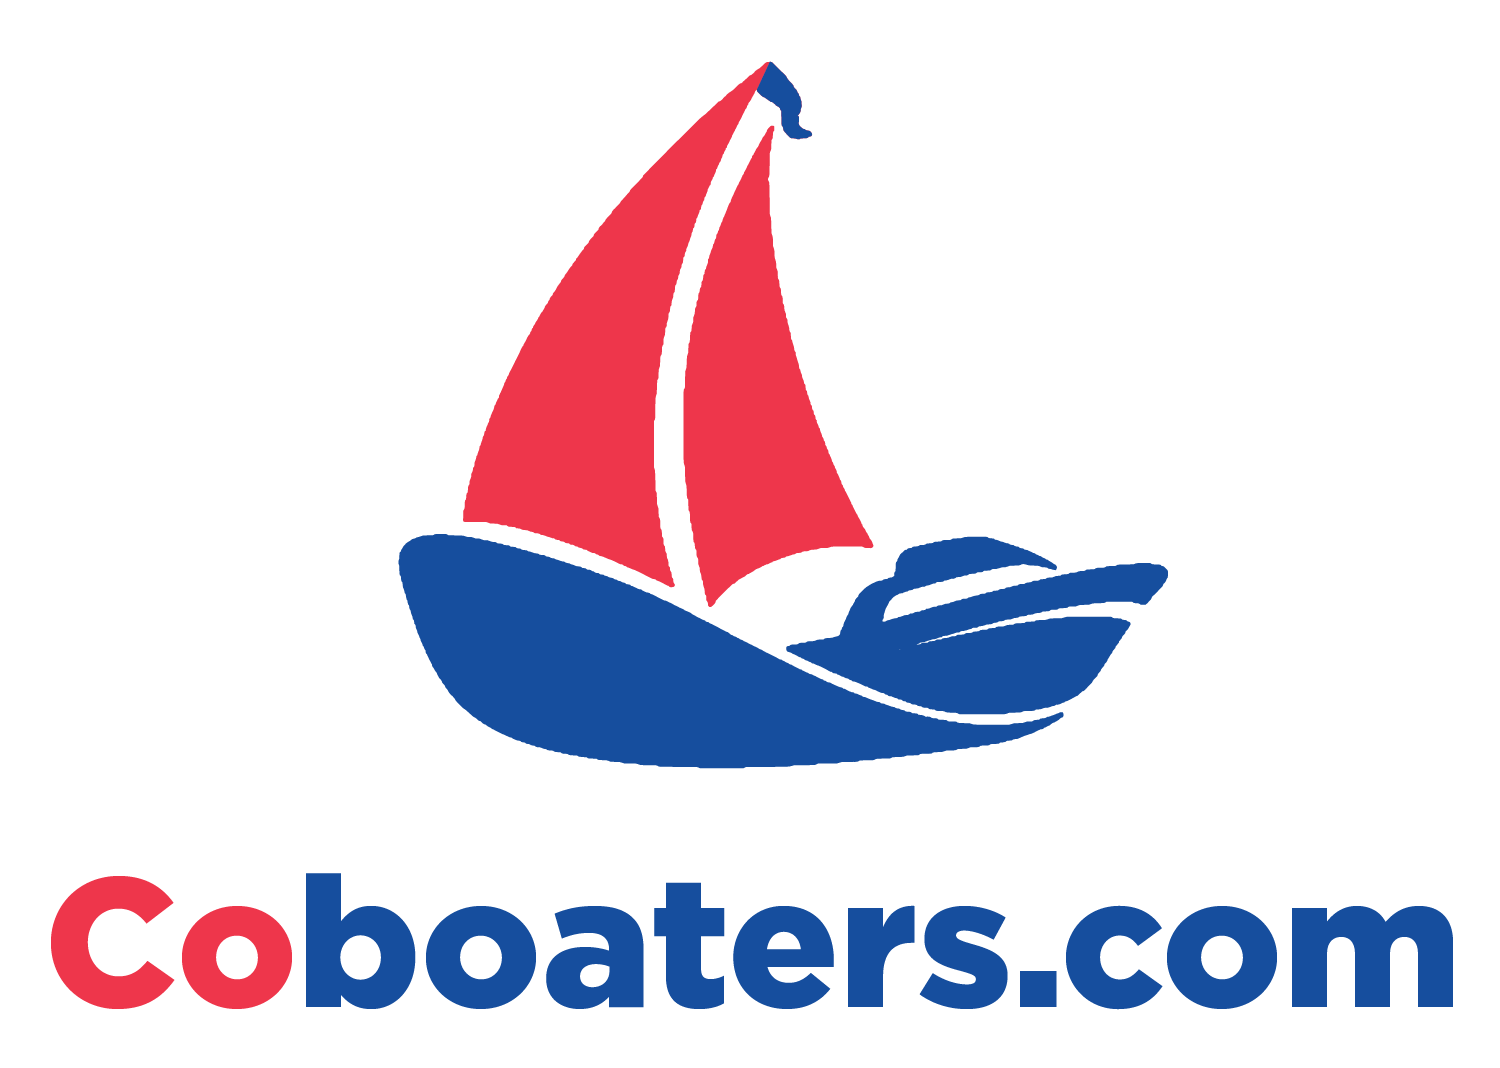 New partnership in the boating industry. Coboaters is now affiliated with NauticED